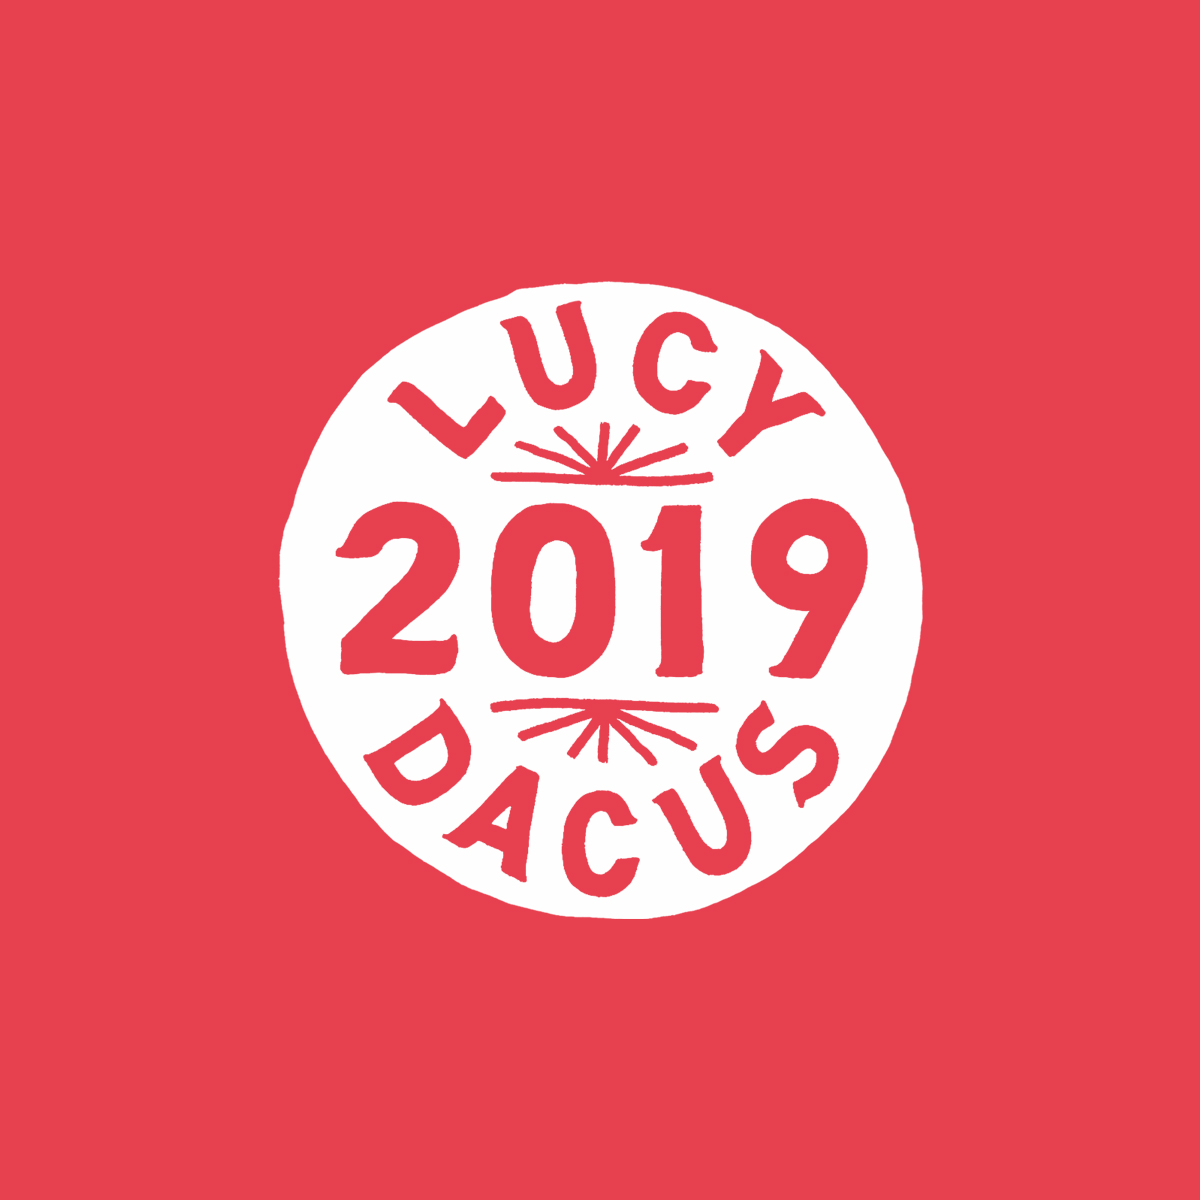 "Forever Half Mast" Lucy Dacus 2019